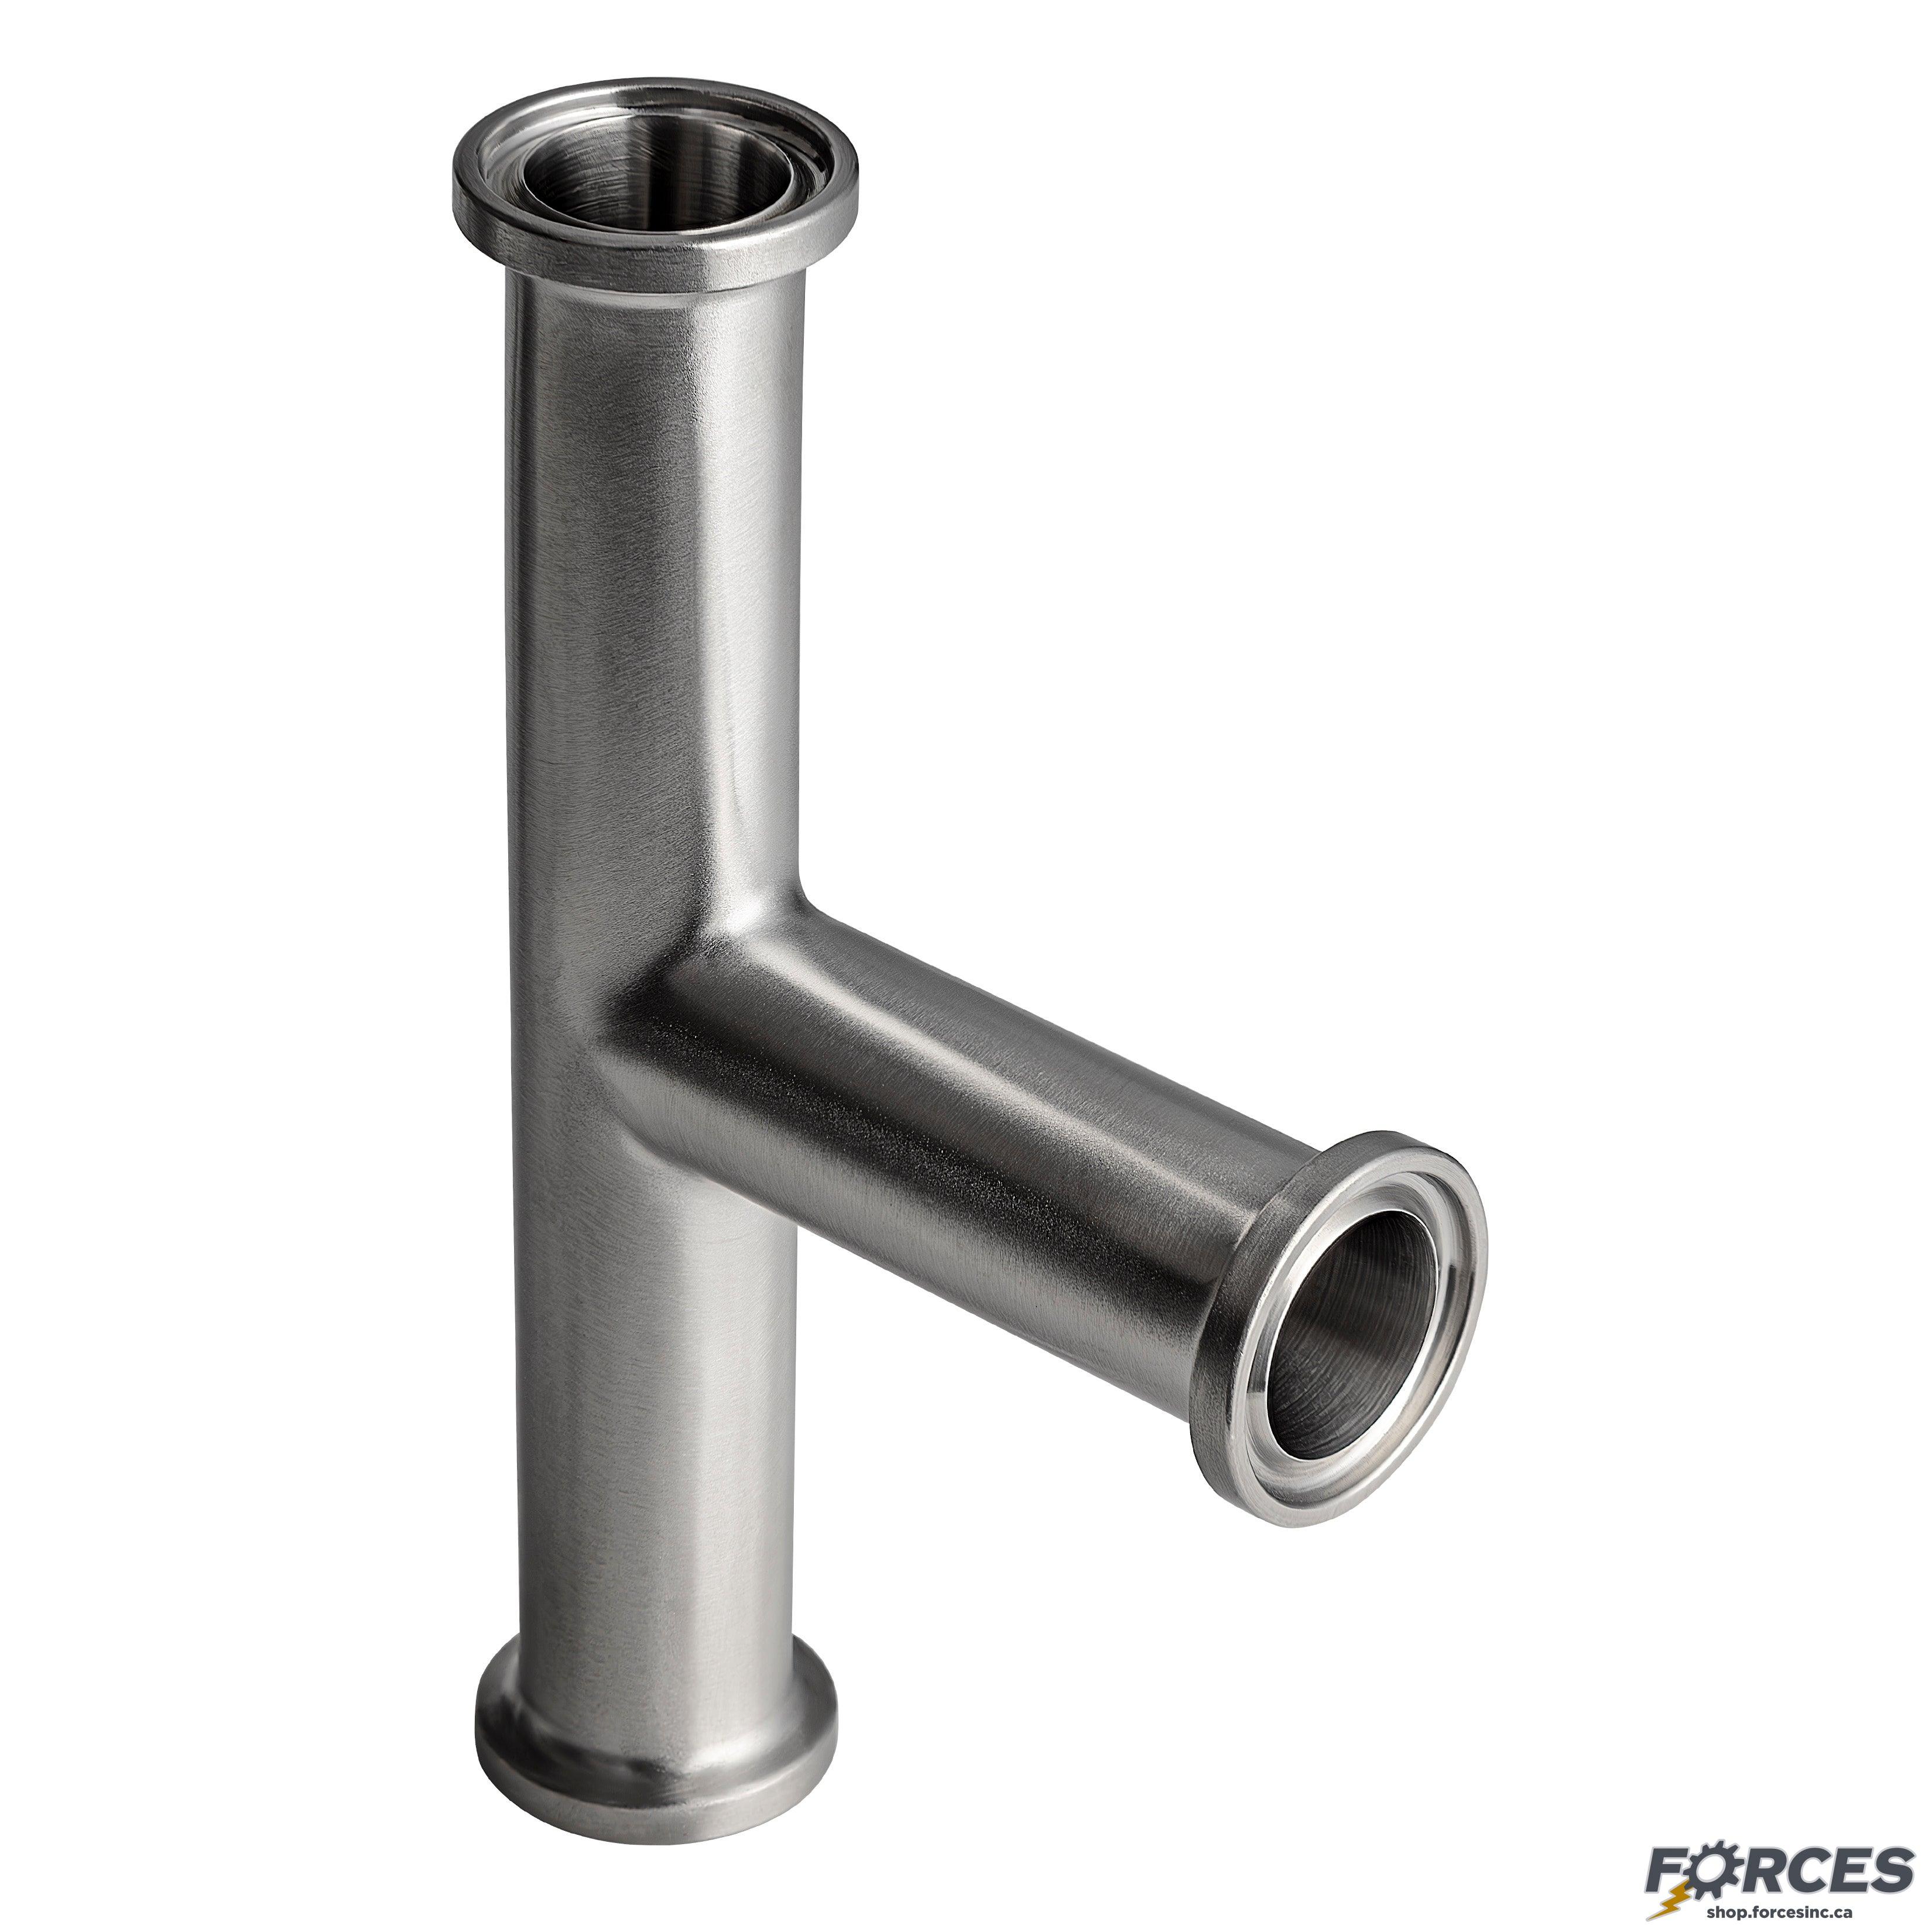 4" Tri-Clamp Tee - Stainless Steel 316 - Forces Inc